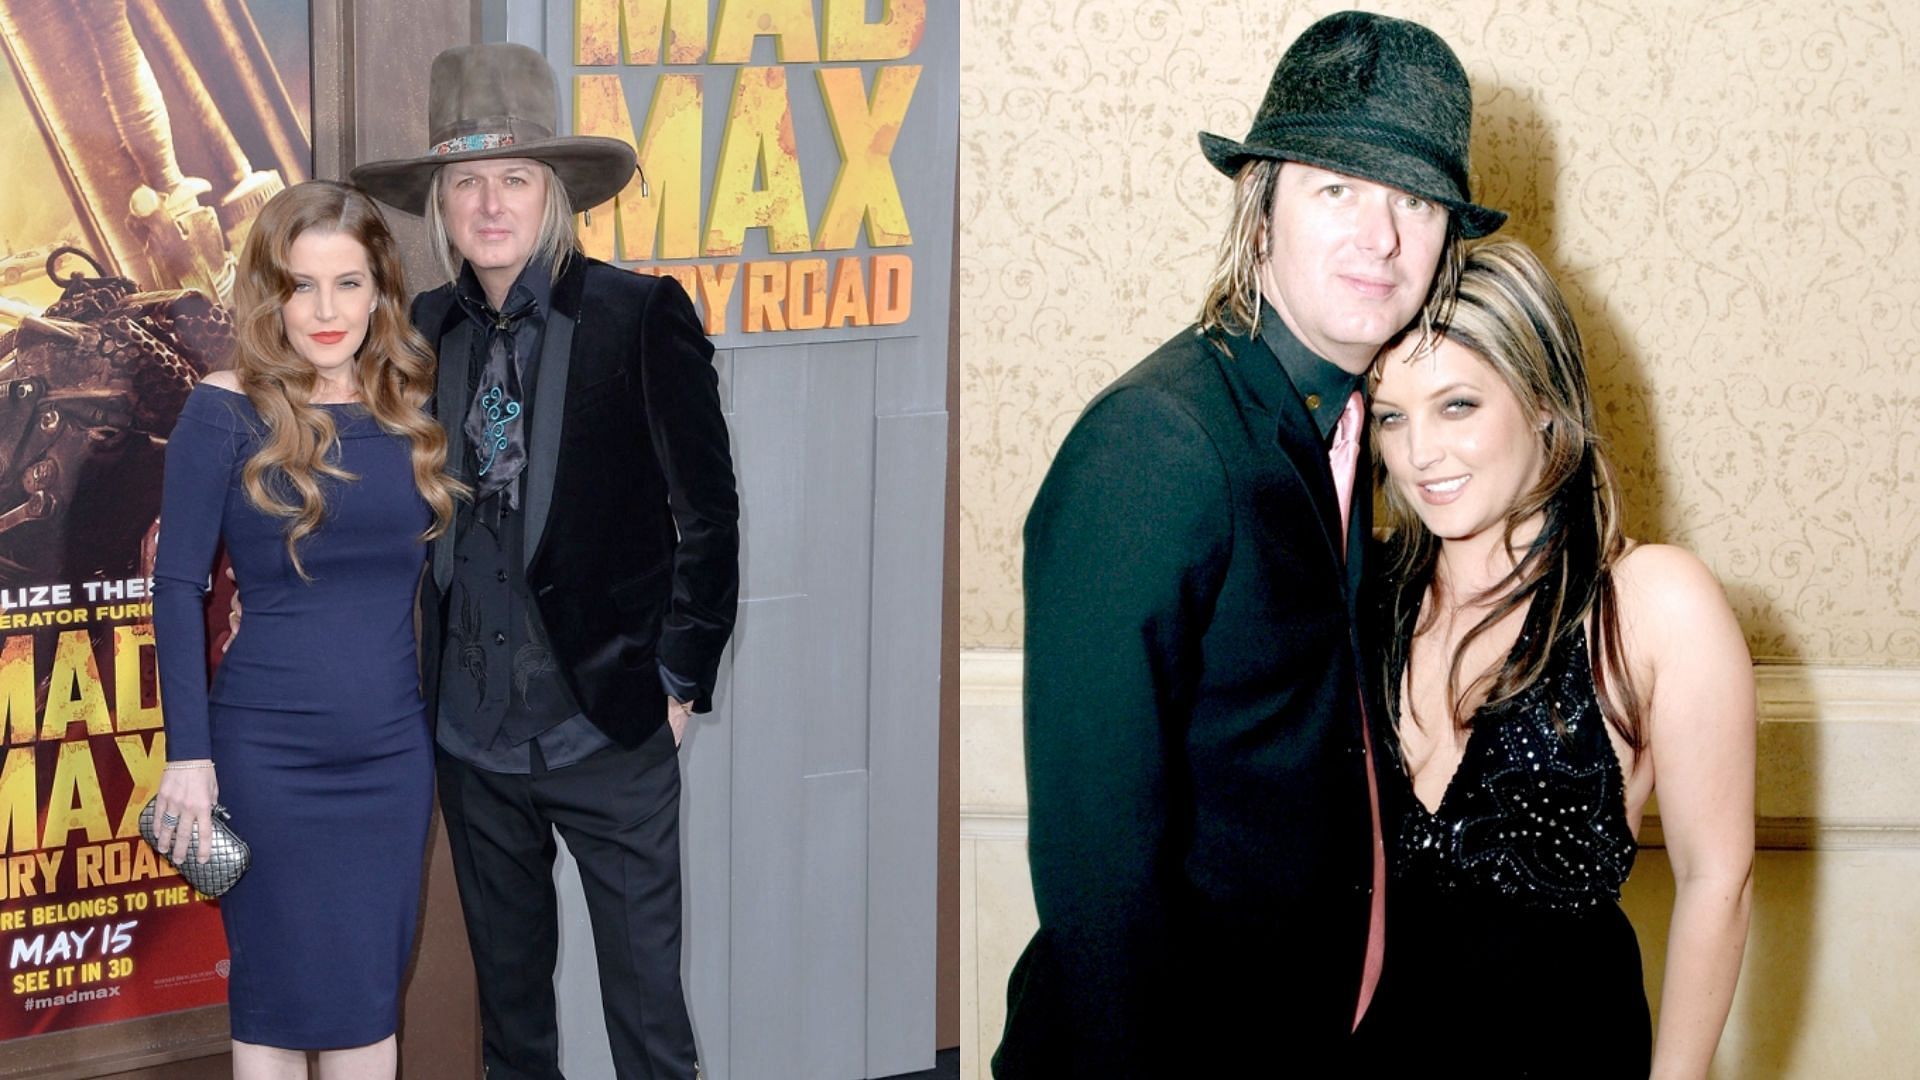 Presley and Lockwood in 2015 (L) and in 2004 (R) (Images via Getty/Stewart Cook and Dale Wilcox)